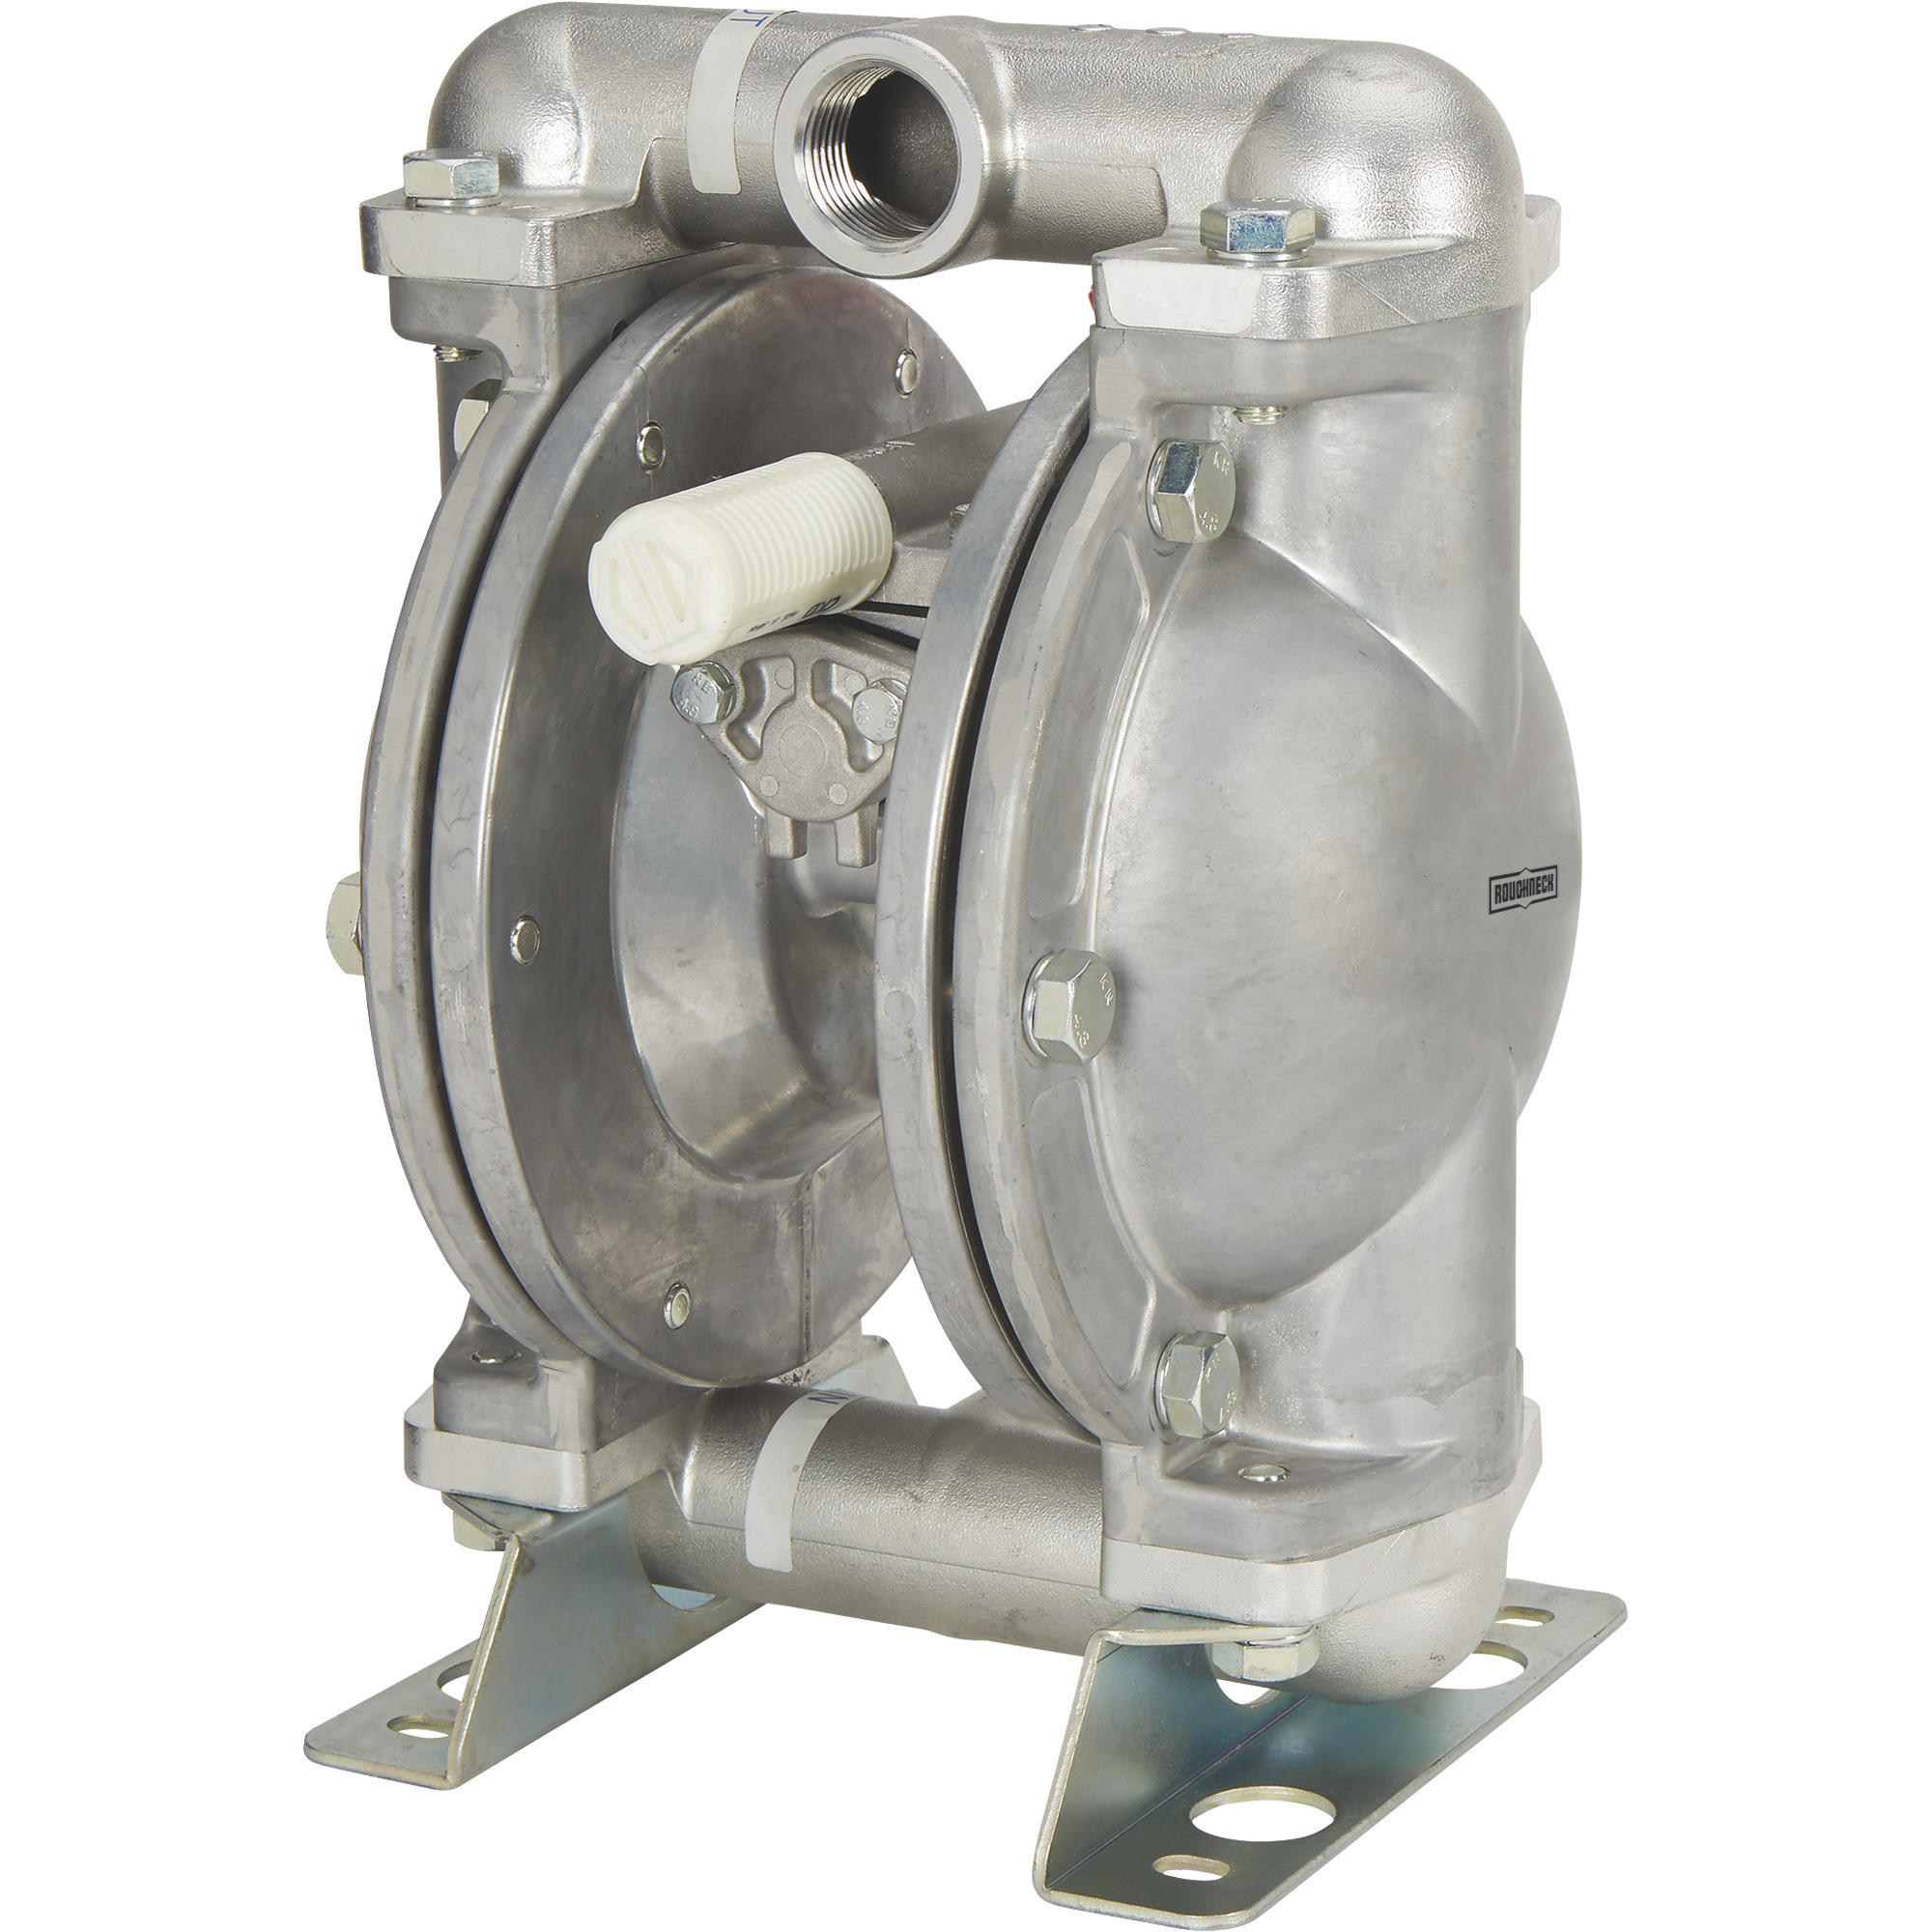 Roughneck Air-Operated Double Diaphragm Pump, 1Inch Ports, 37 GPM, Aluminum